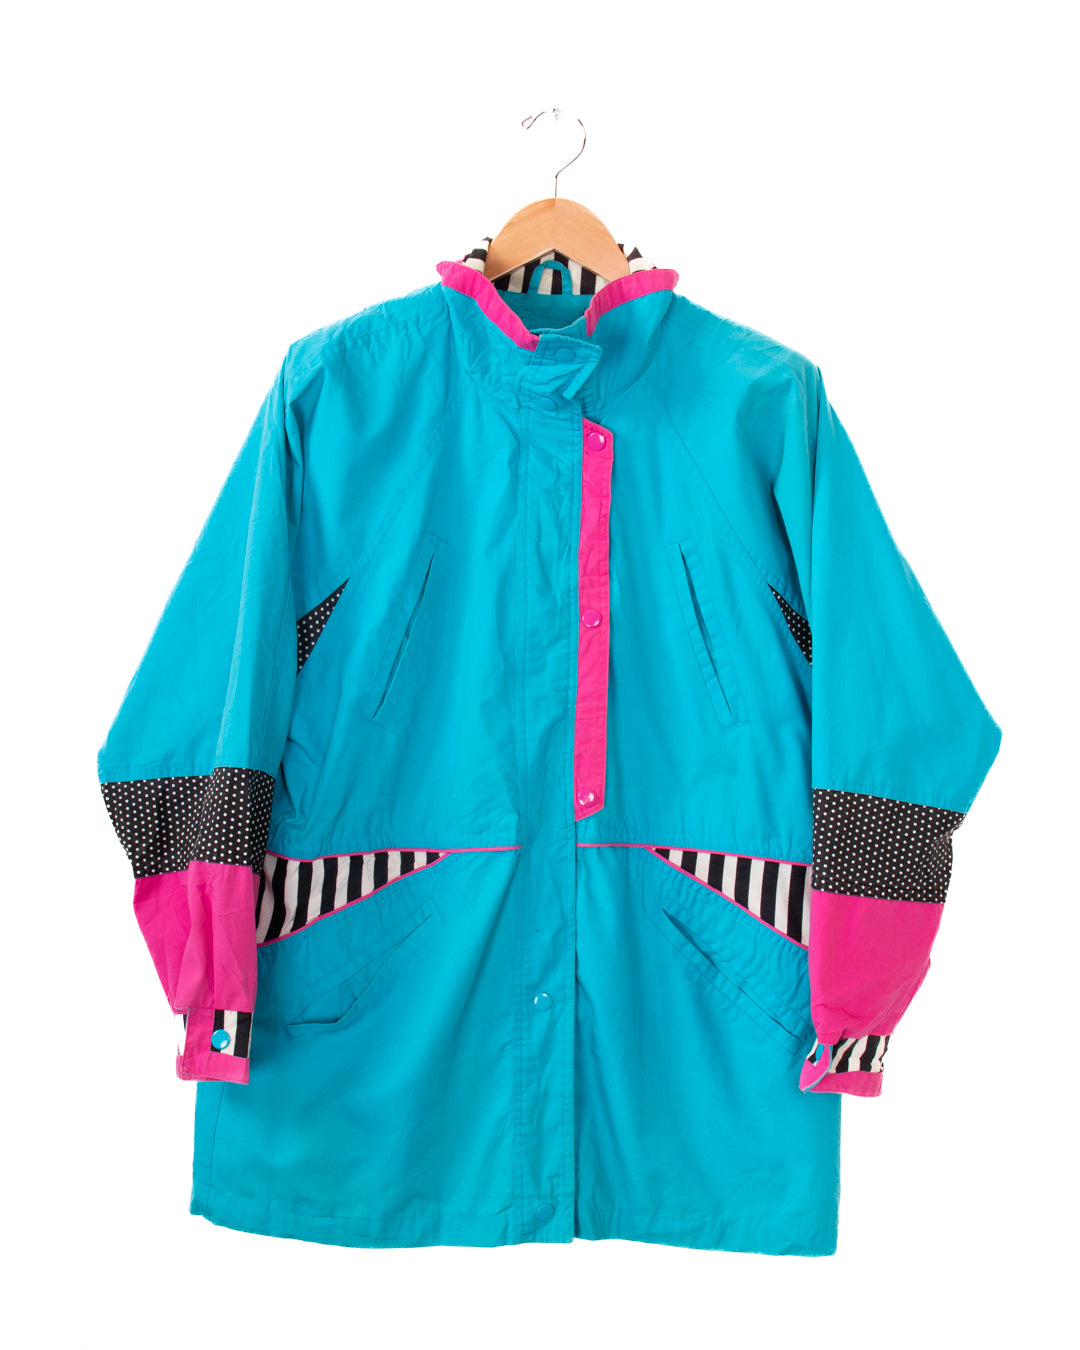 Current Seen Cotton Candy Jacket